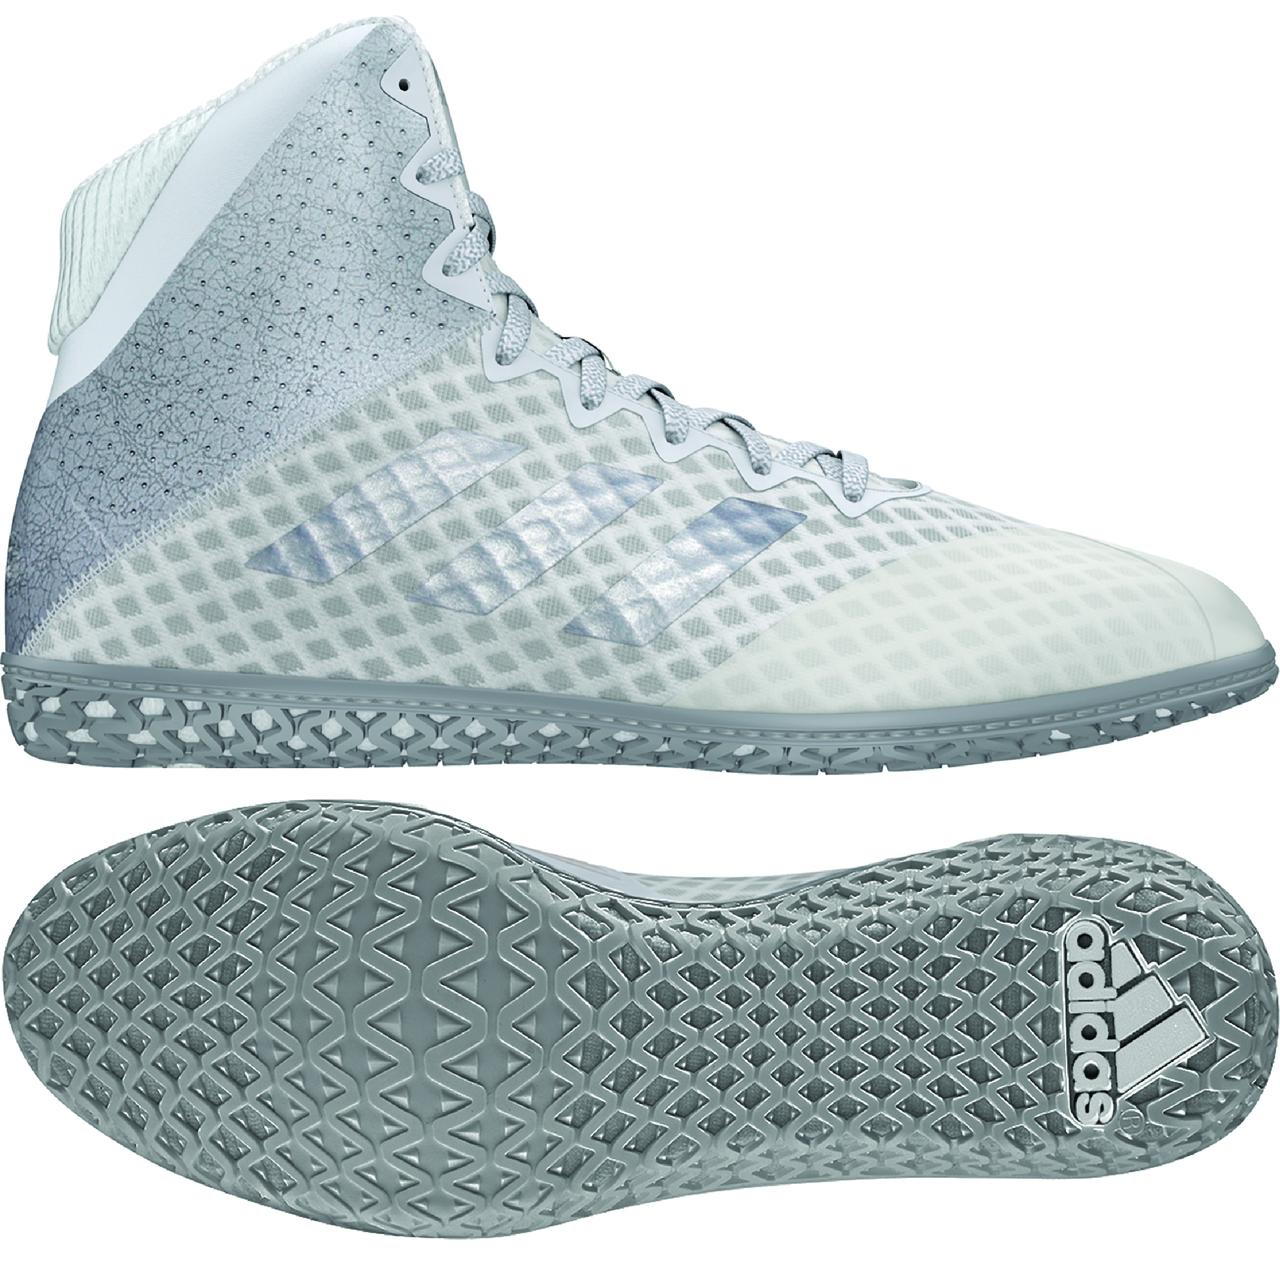 https://www.wrestling-central.net/images/shoes/adidas_EF2113_Mat%20Wizard%20Hype_white_silver.jpg